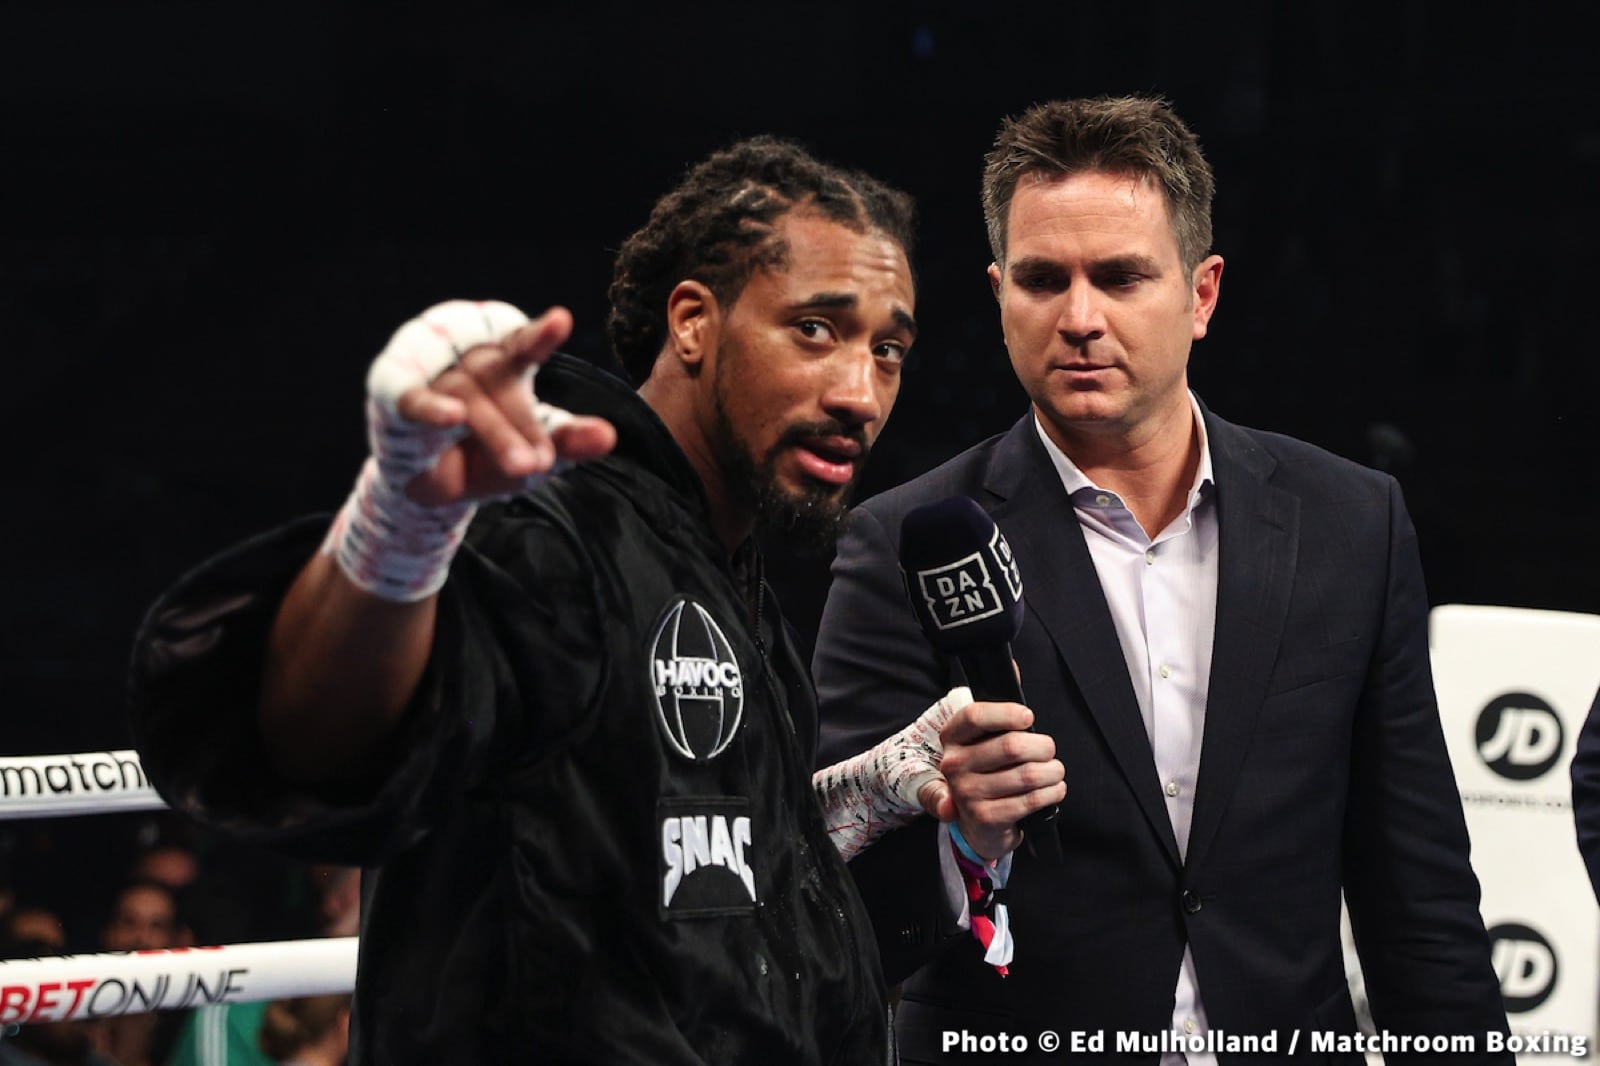 Image: Demetrius Andrade shouldn't have to face Zhanibek Alimkhanuly yet says Eddie Hearn